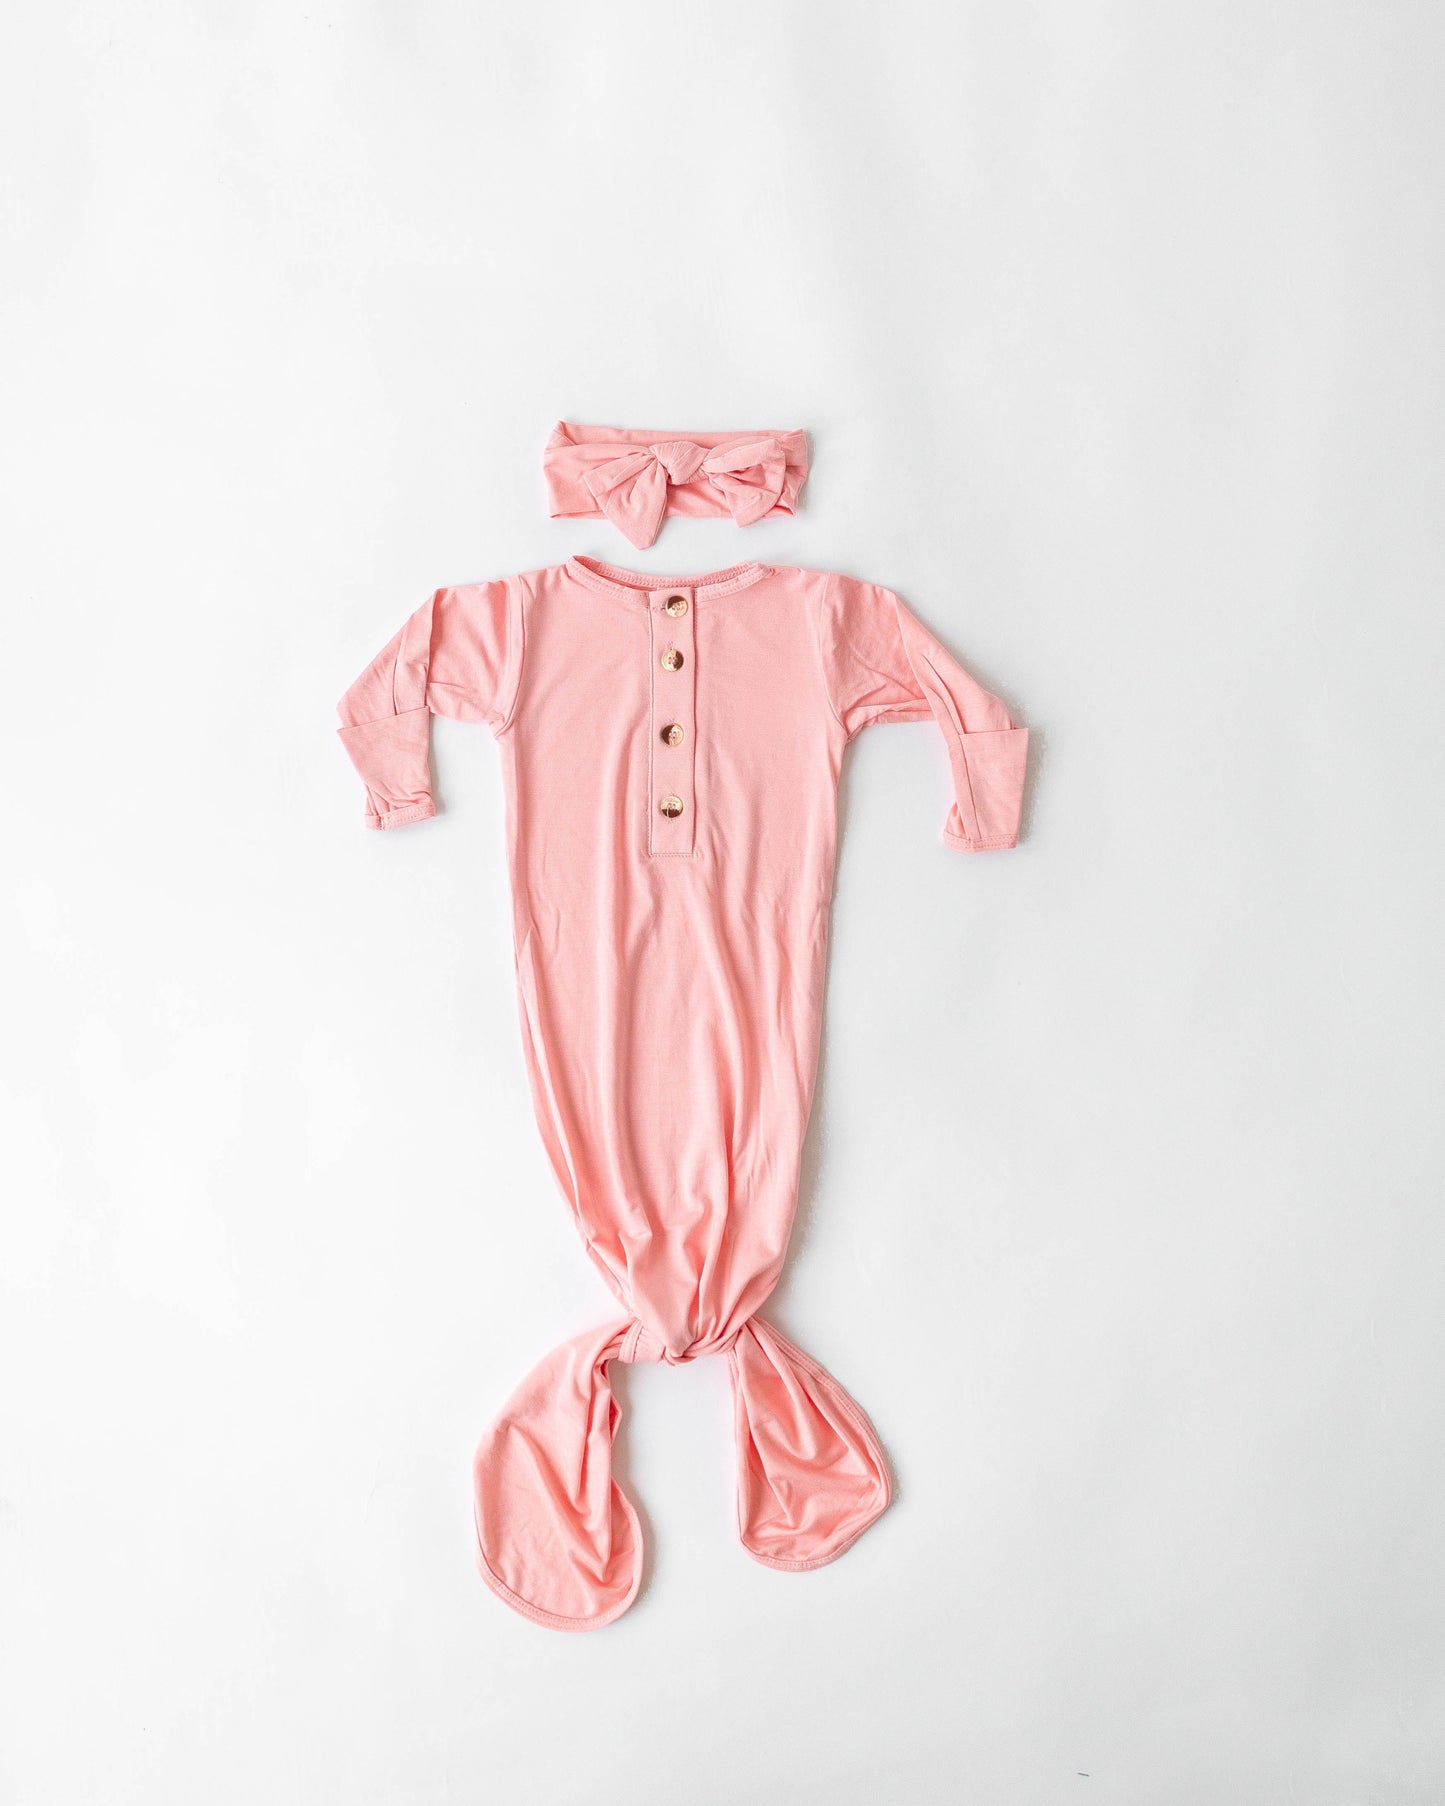 Stroller Society Knotted Gown Set - Pink